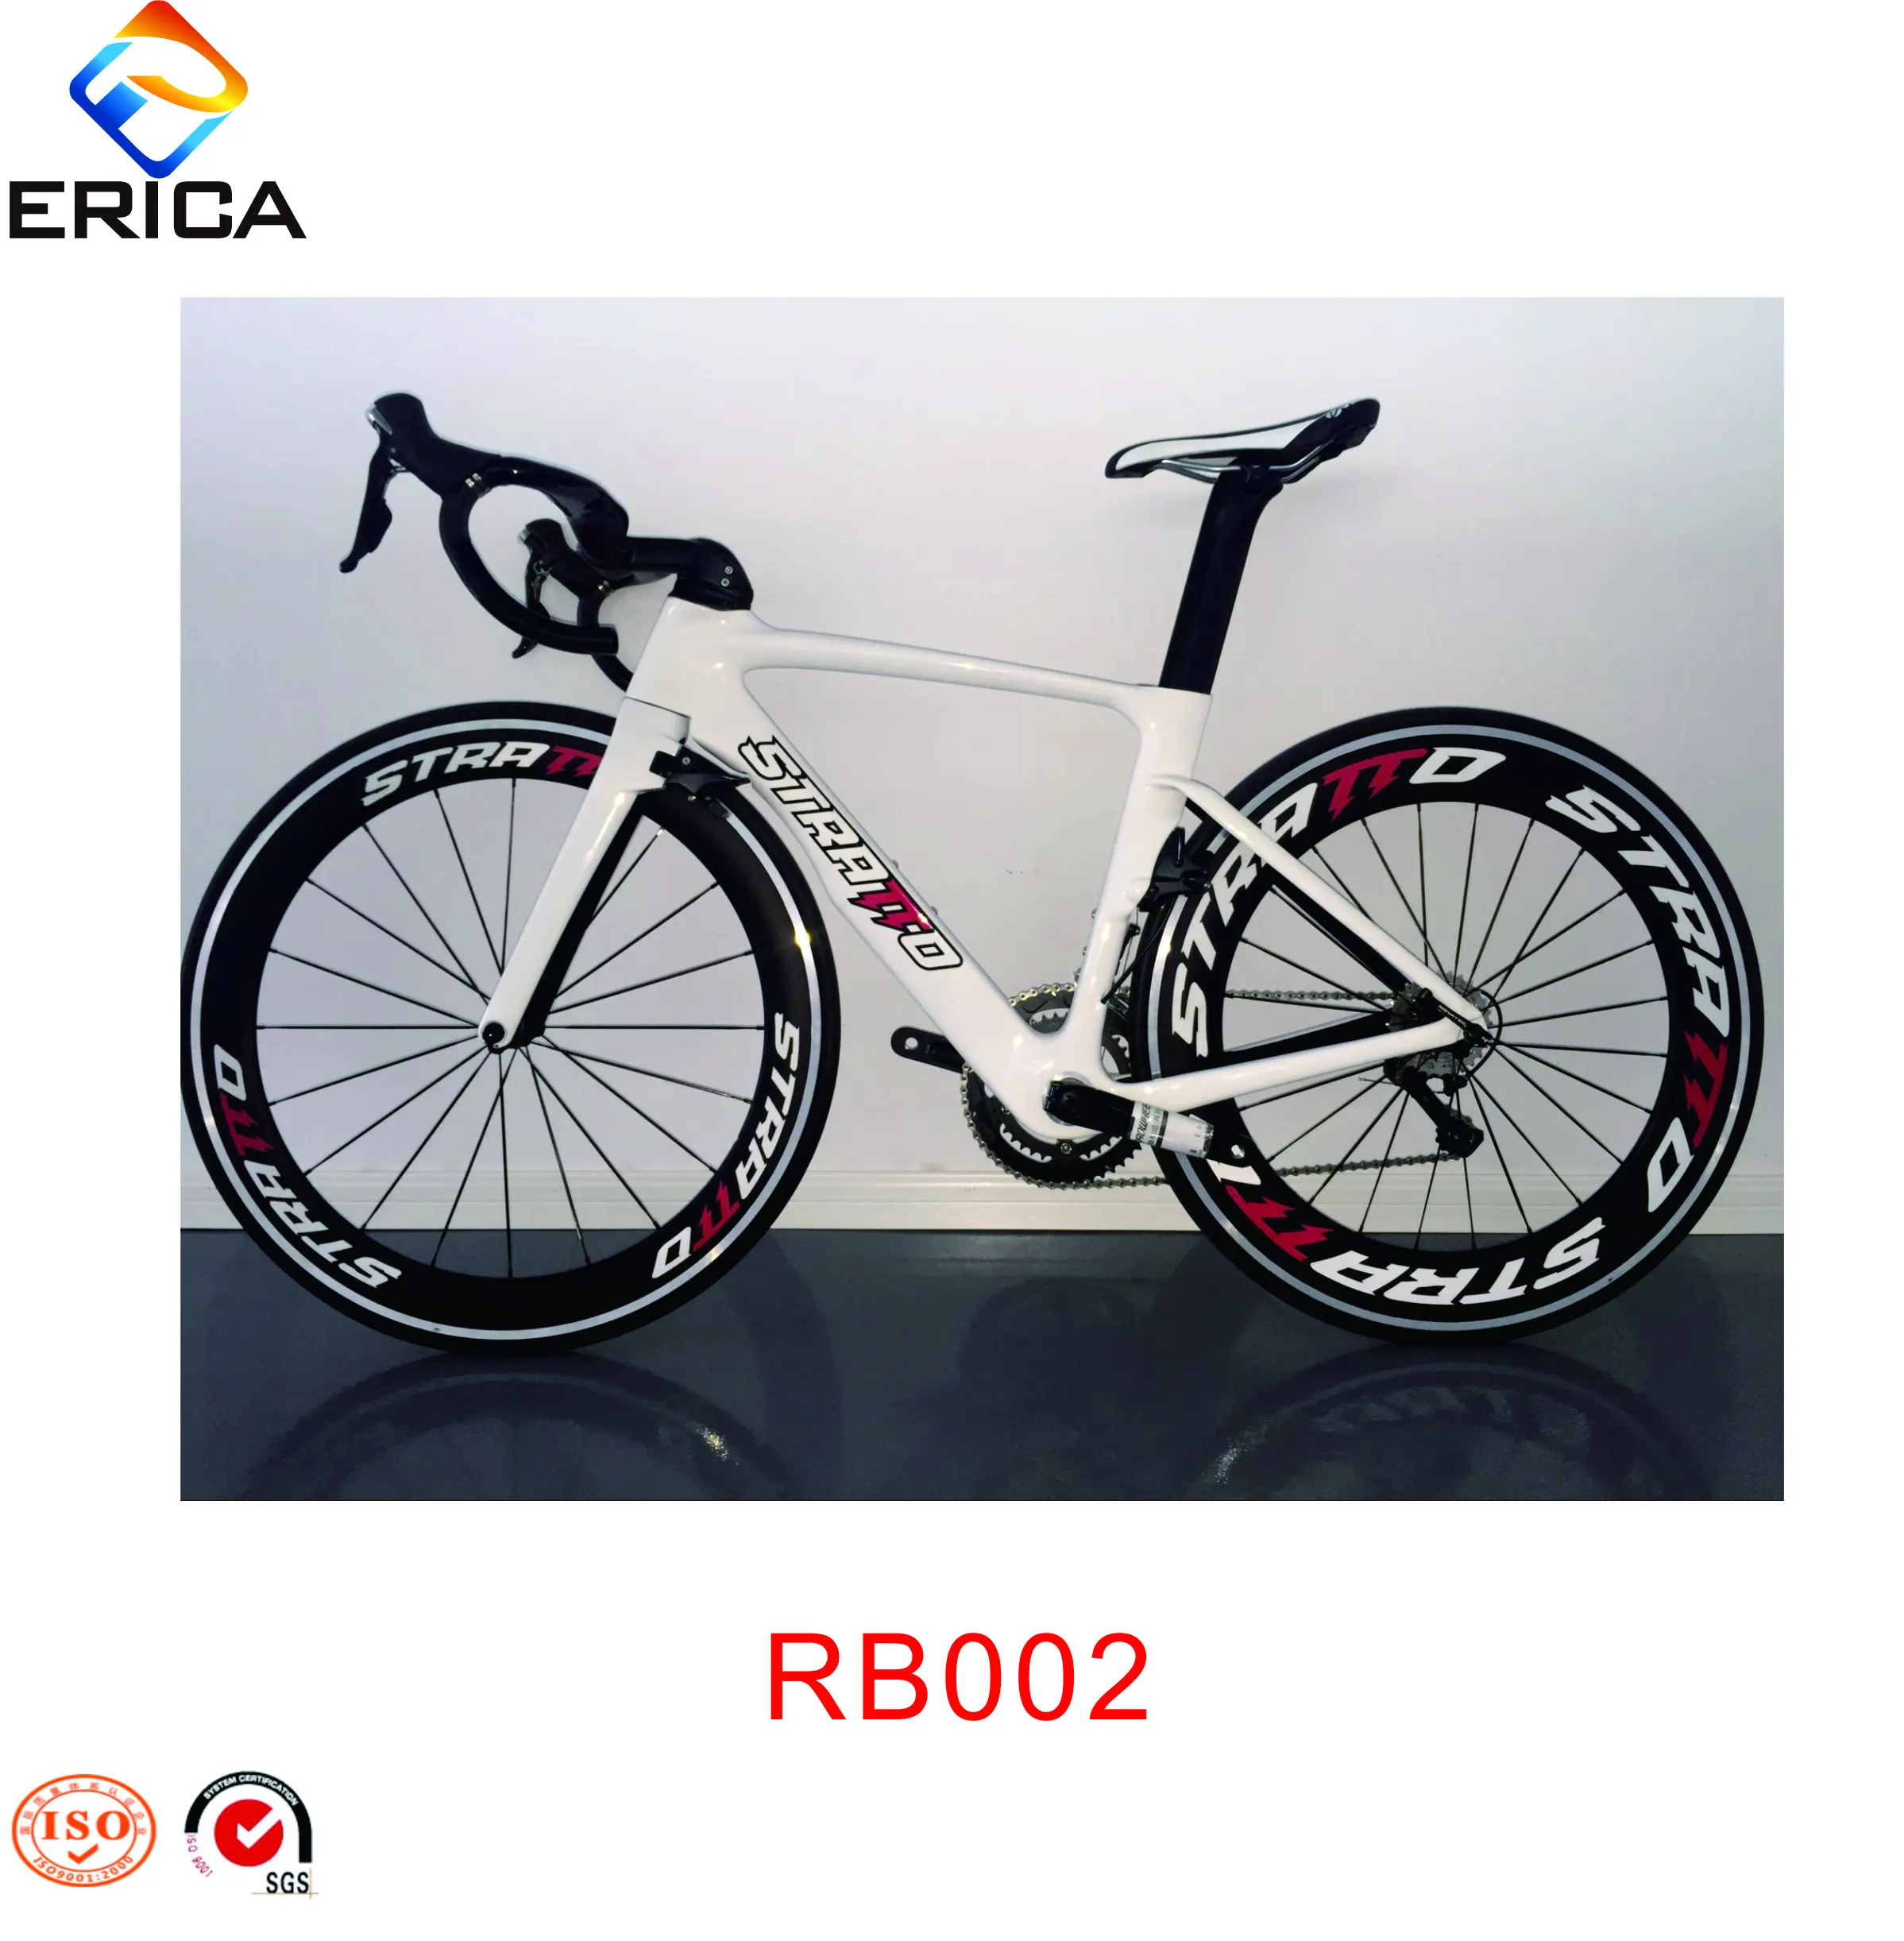 OEM Lightweight 22 Speed Inner Cable Carbon Fiber Road Racing Bike With 60ミリメートル700C Carbon Wheel